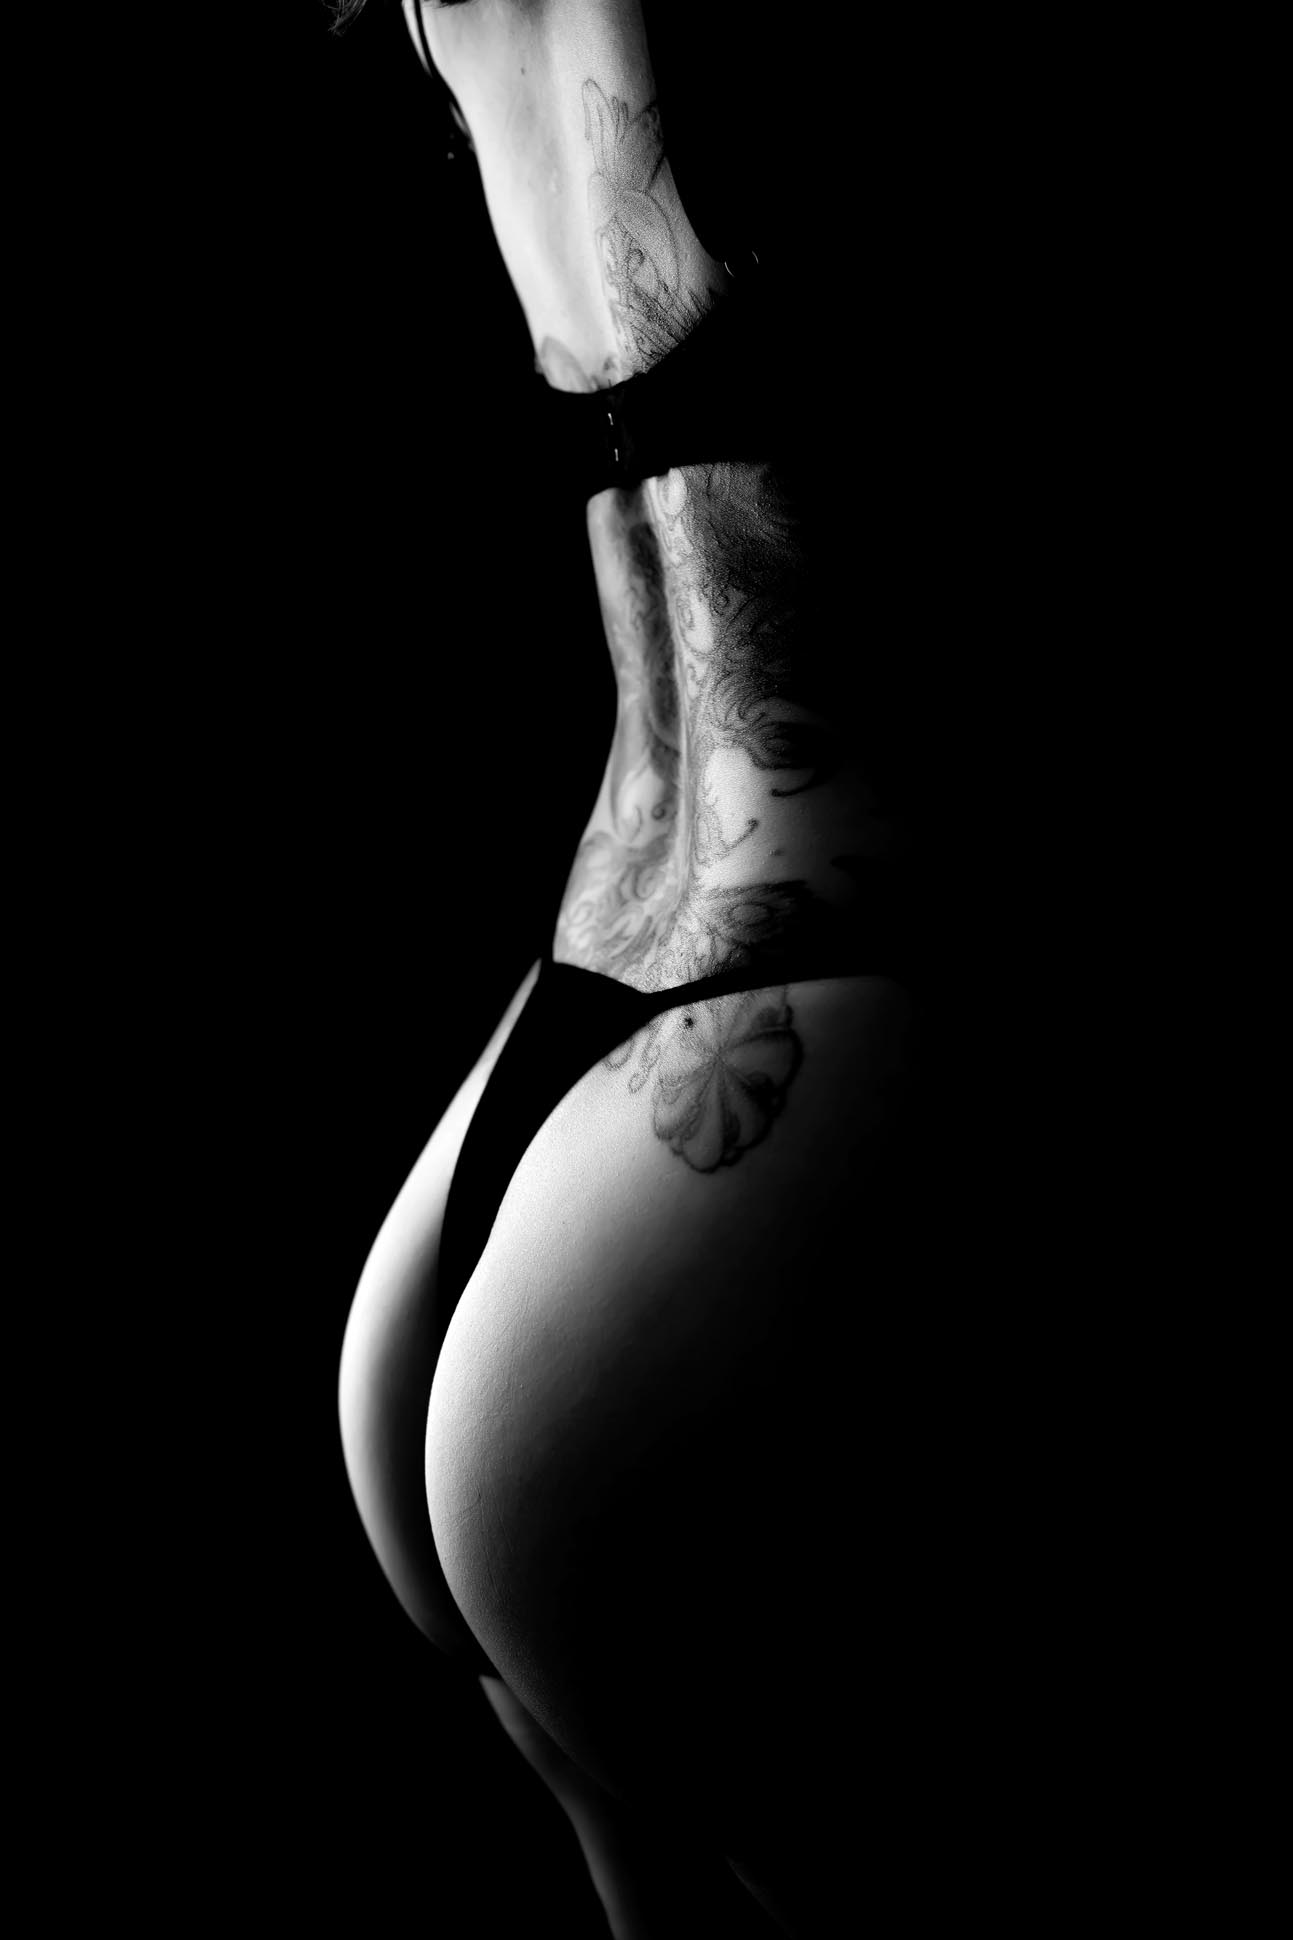 Silhouette of woman's derriere with black lingerie shot in black and white during Dallas boudoir photography session.